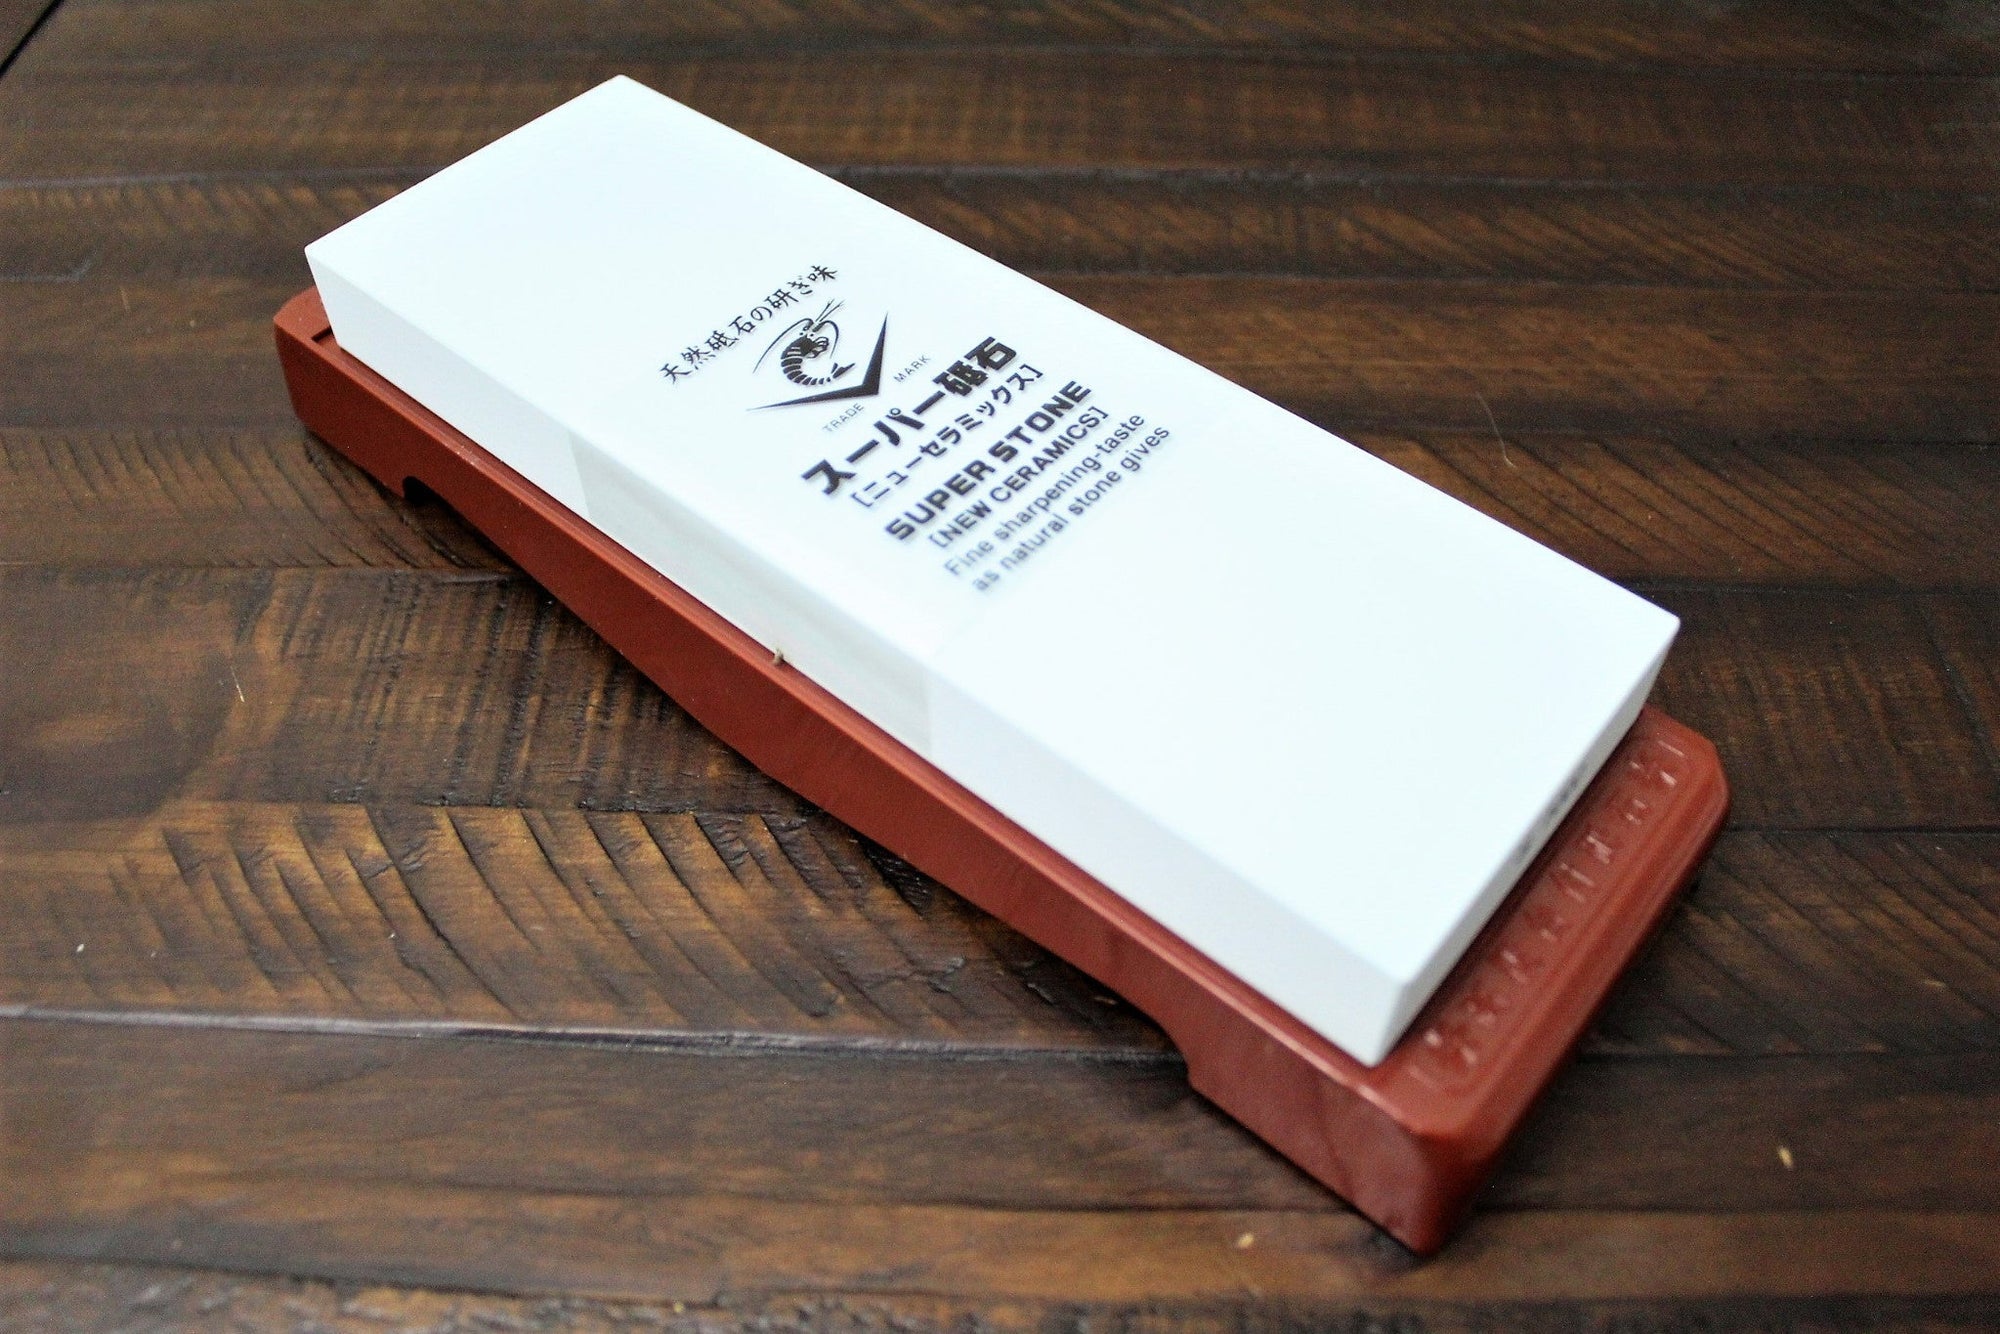 https://cdn.shopify.com/s/files/1/0077/4399/5970/files/accessories-naniwa-japanese-sharpening-stone-with-base-grit-1000-1_2000x.jpg?v=1698703621